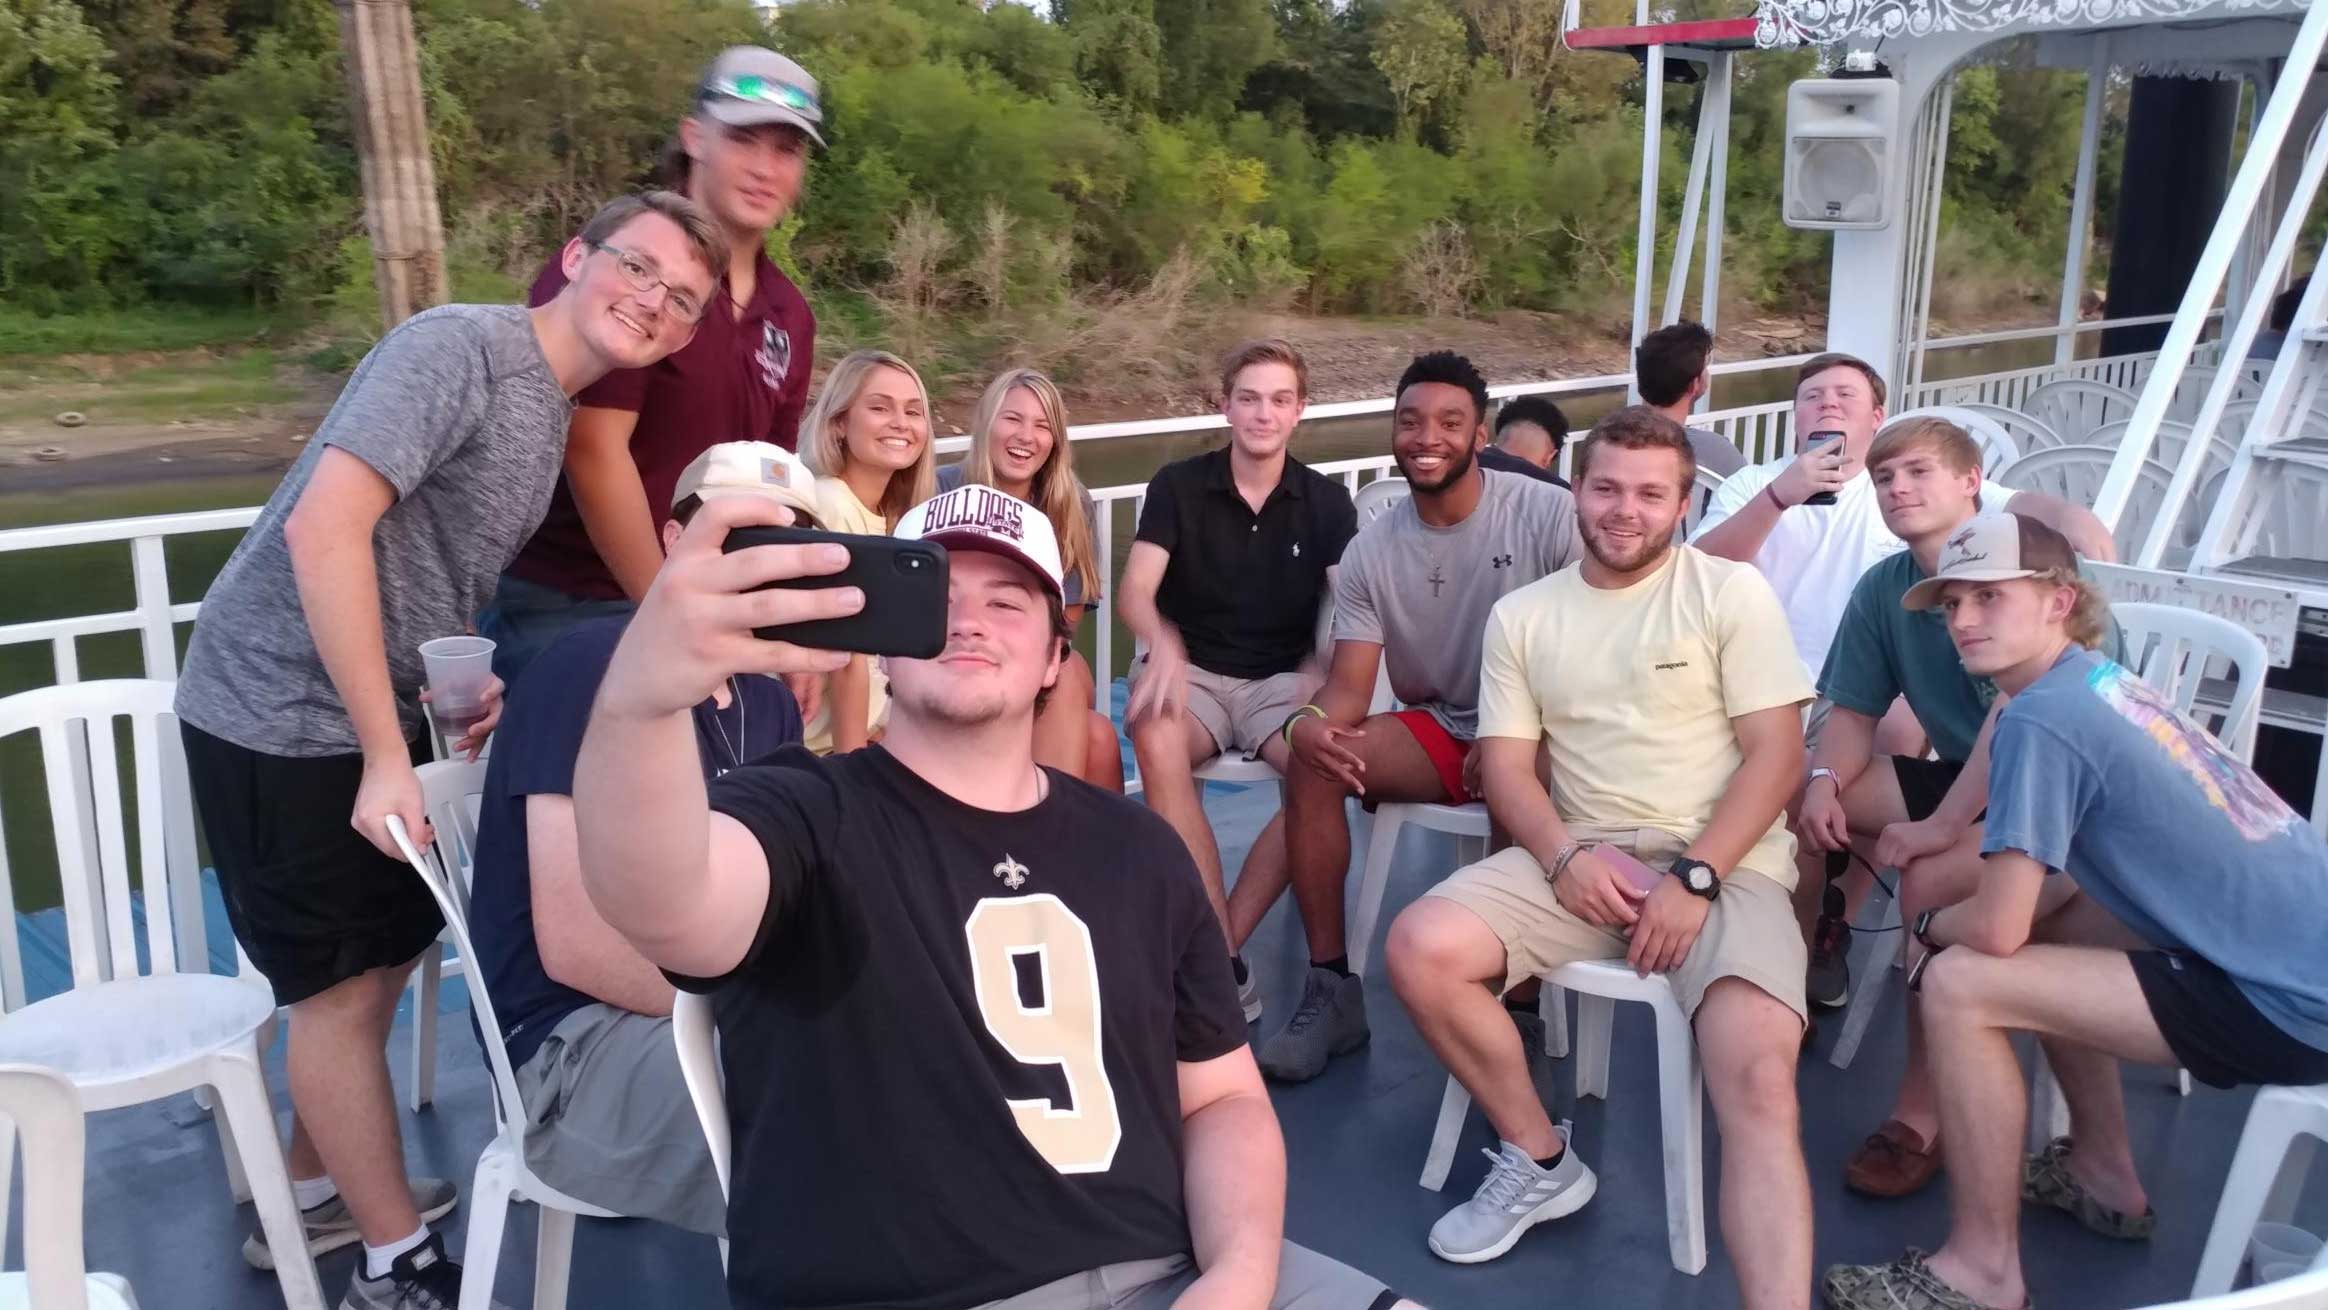 Mississippi State building construction science freshmen gathered on river boat cruise in Memphis taking a selfie